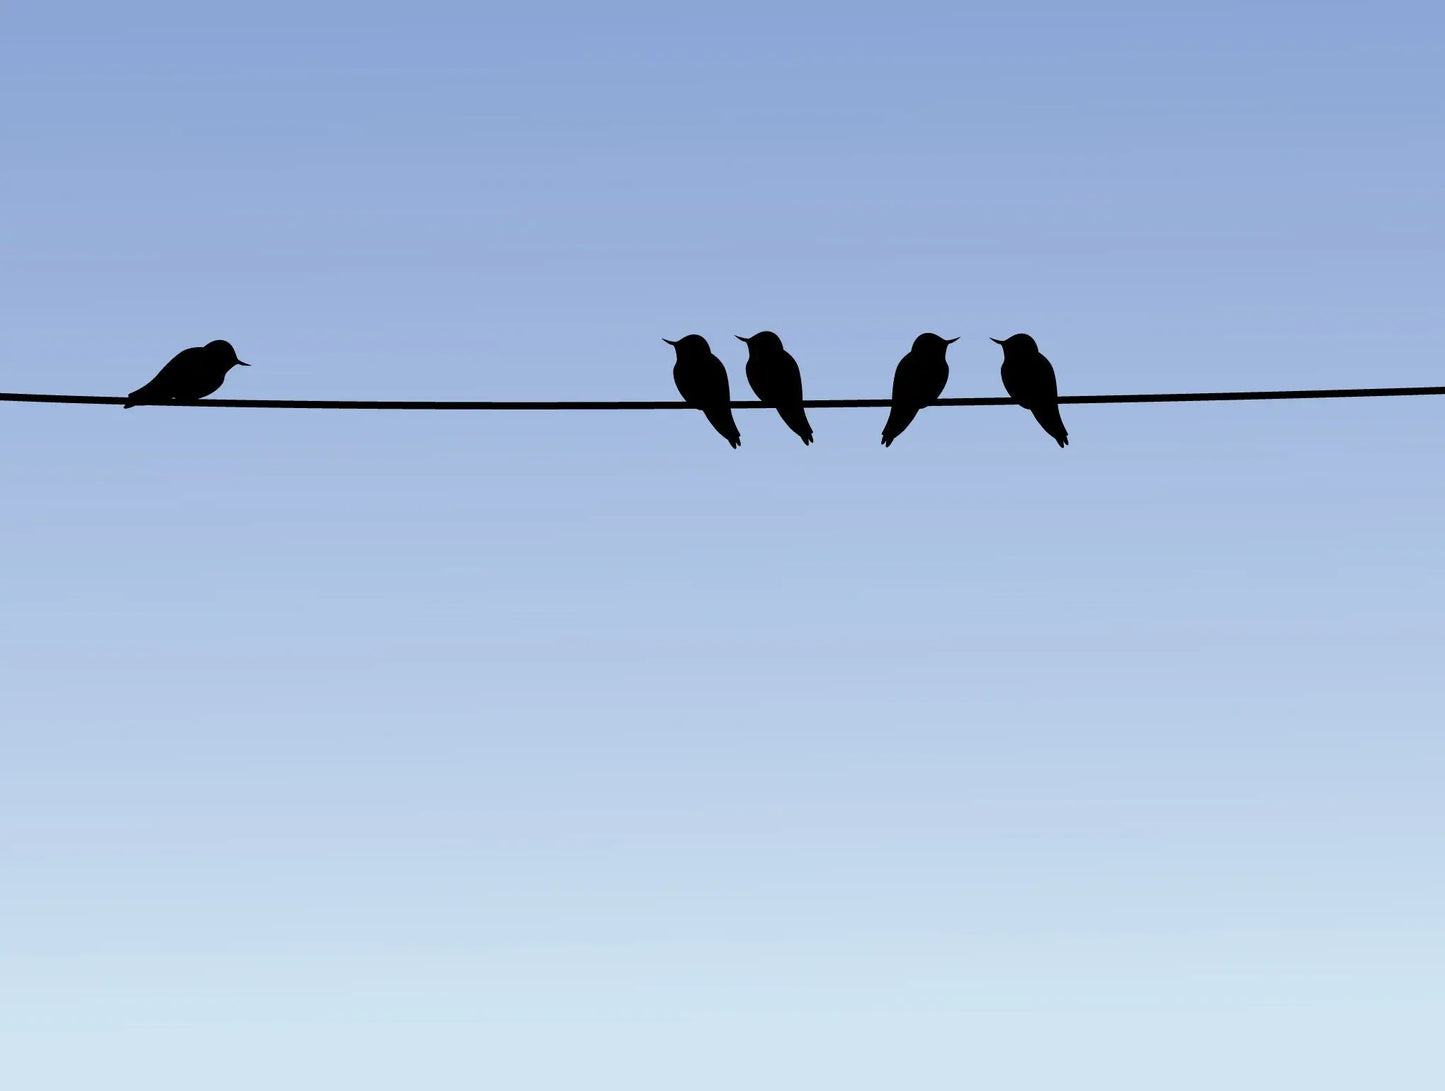 A cute illustration of silhouetted birds perched on a telephone wire against a vibrant blue sky.